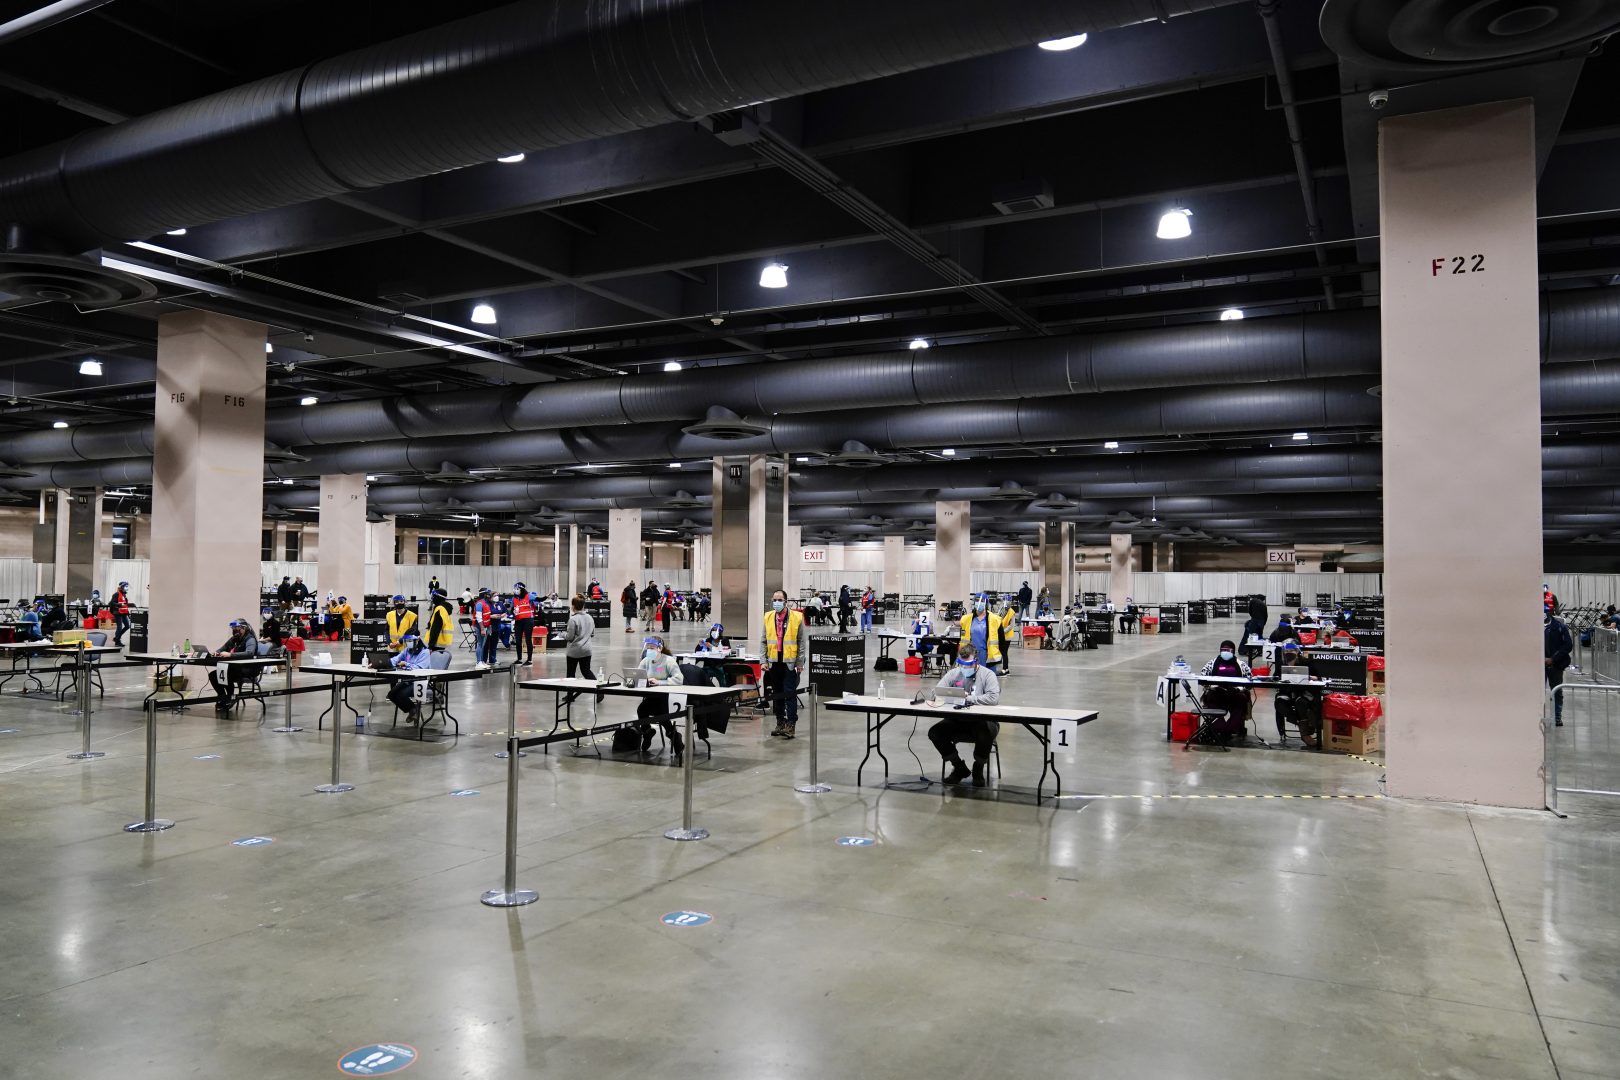 A COVID-19 vaccination site is set up at the Pennsylvania Convention Center in Philadelphia, Wednesday, Feb. 3, 2021. The clinic opened to help provide second doses of the vaccine.